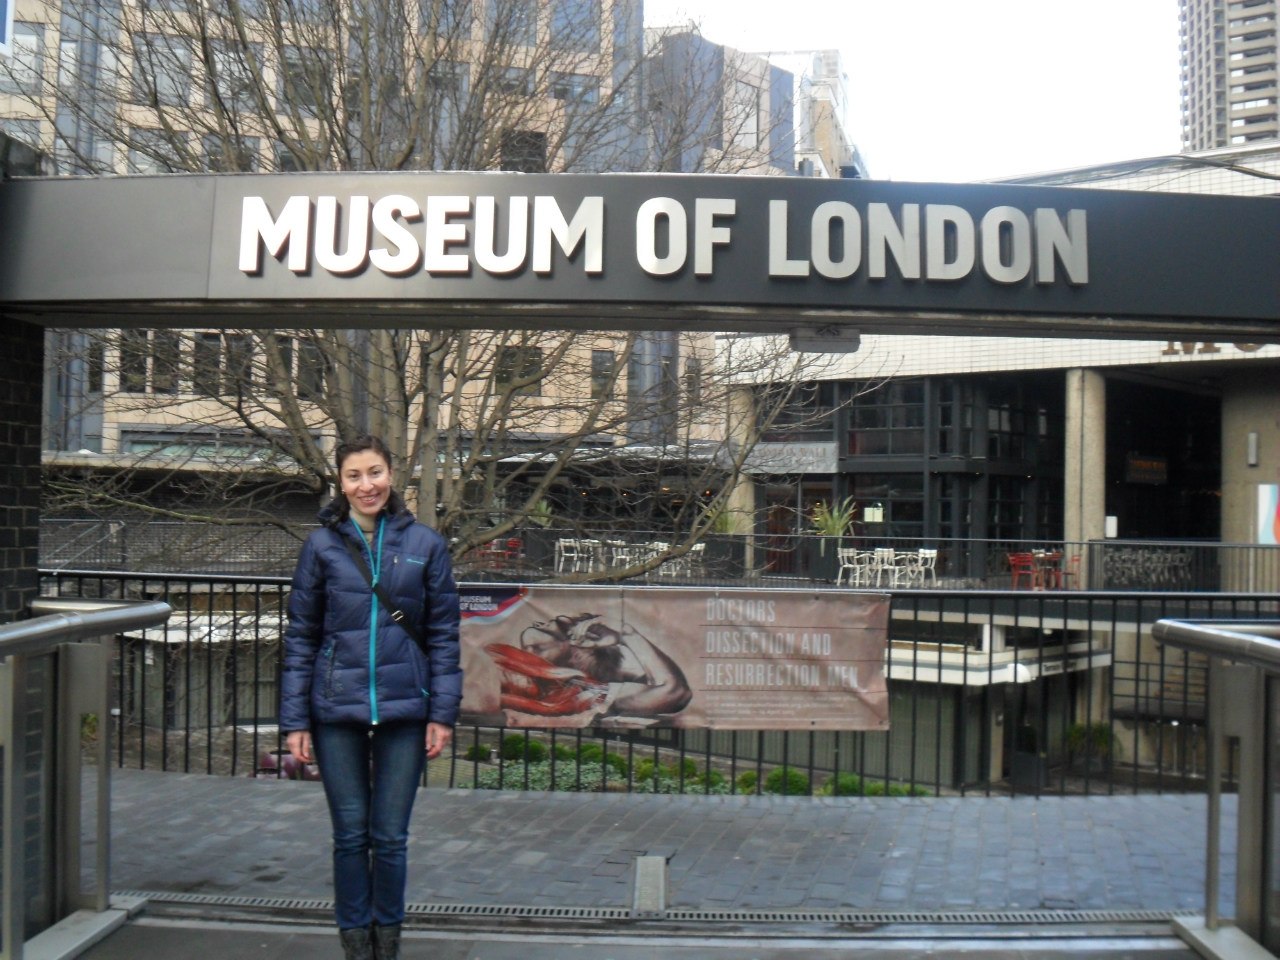 3- The Museum of London